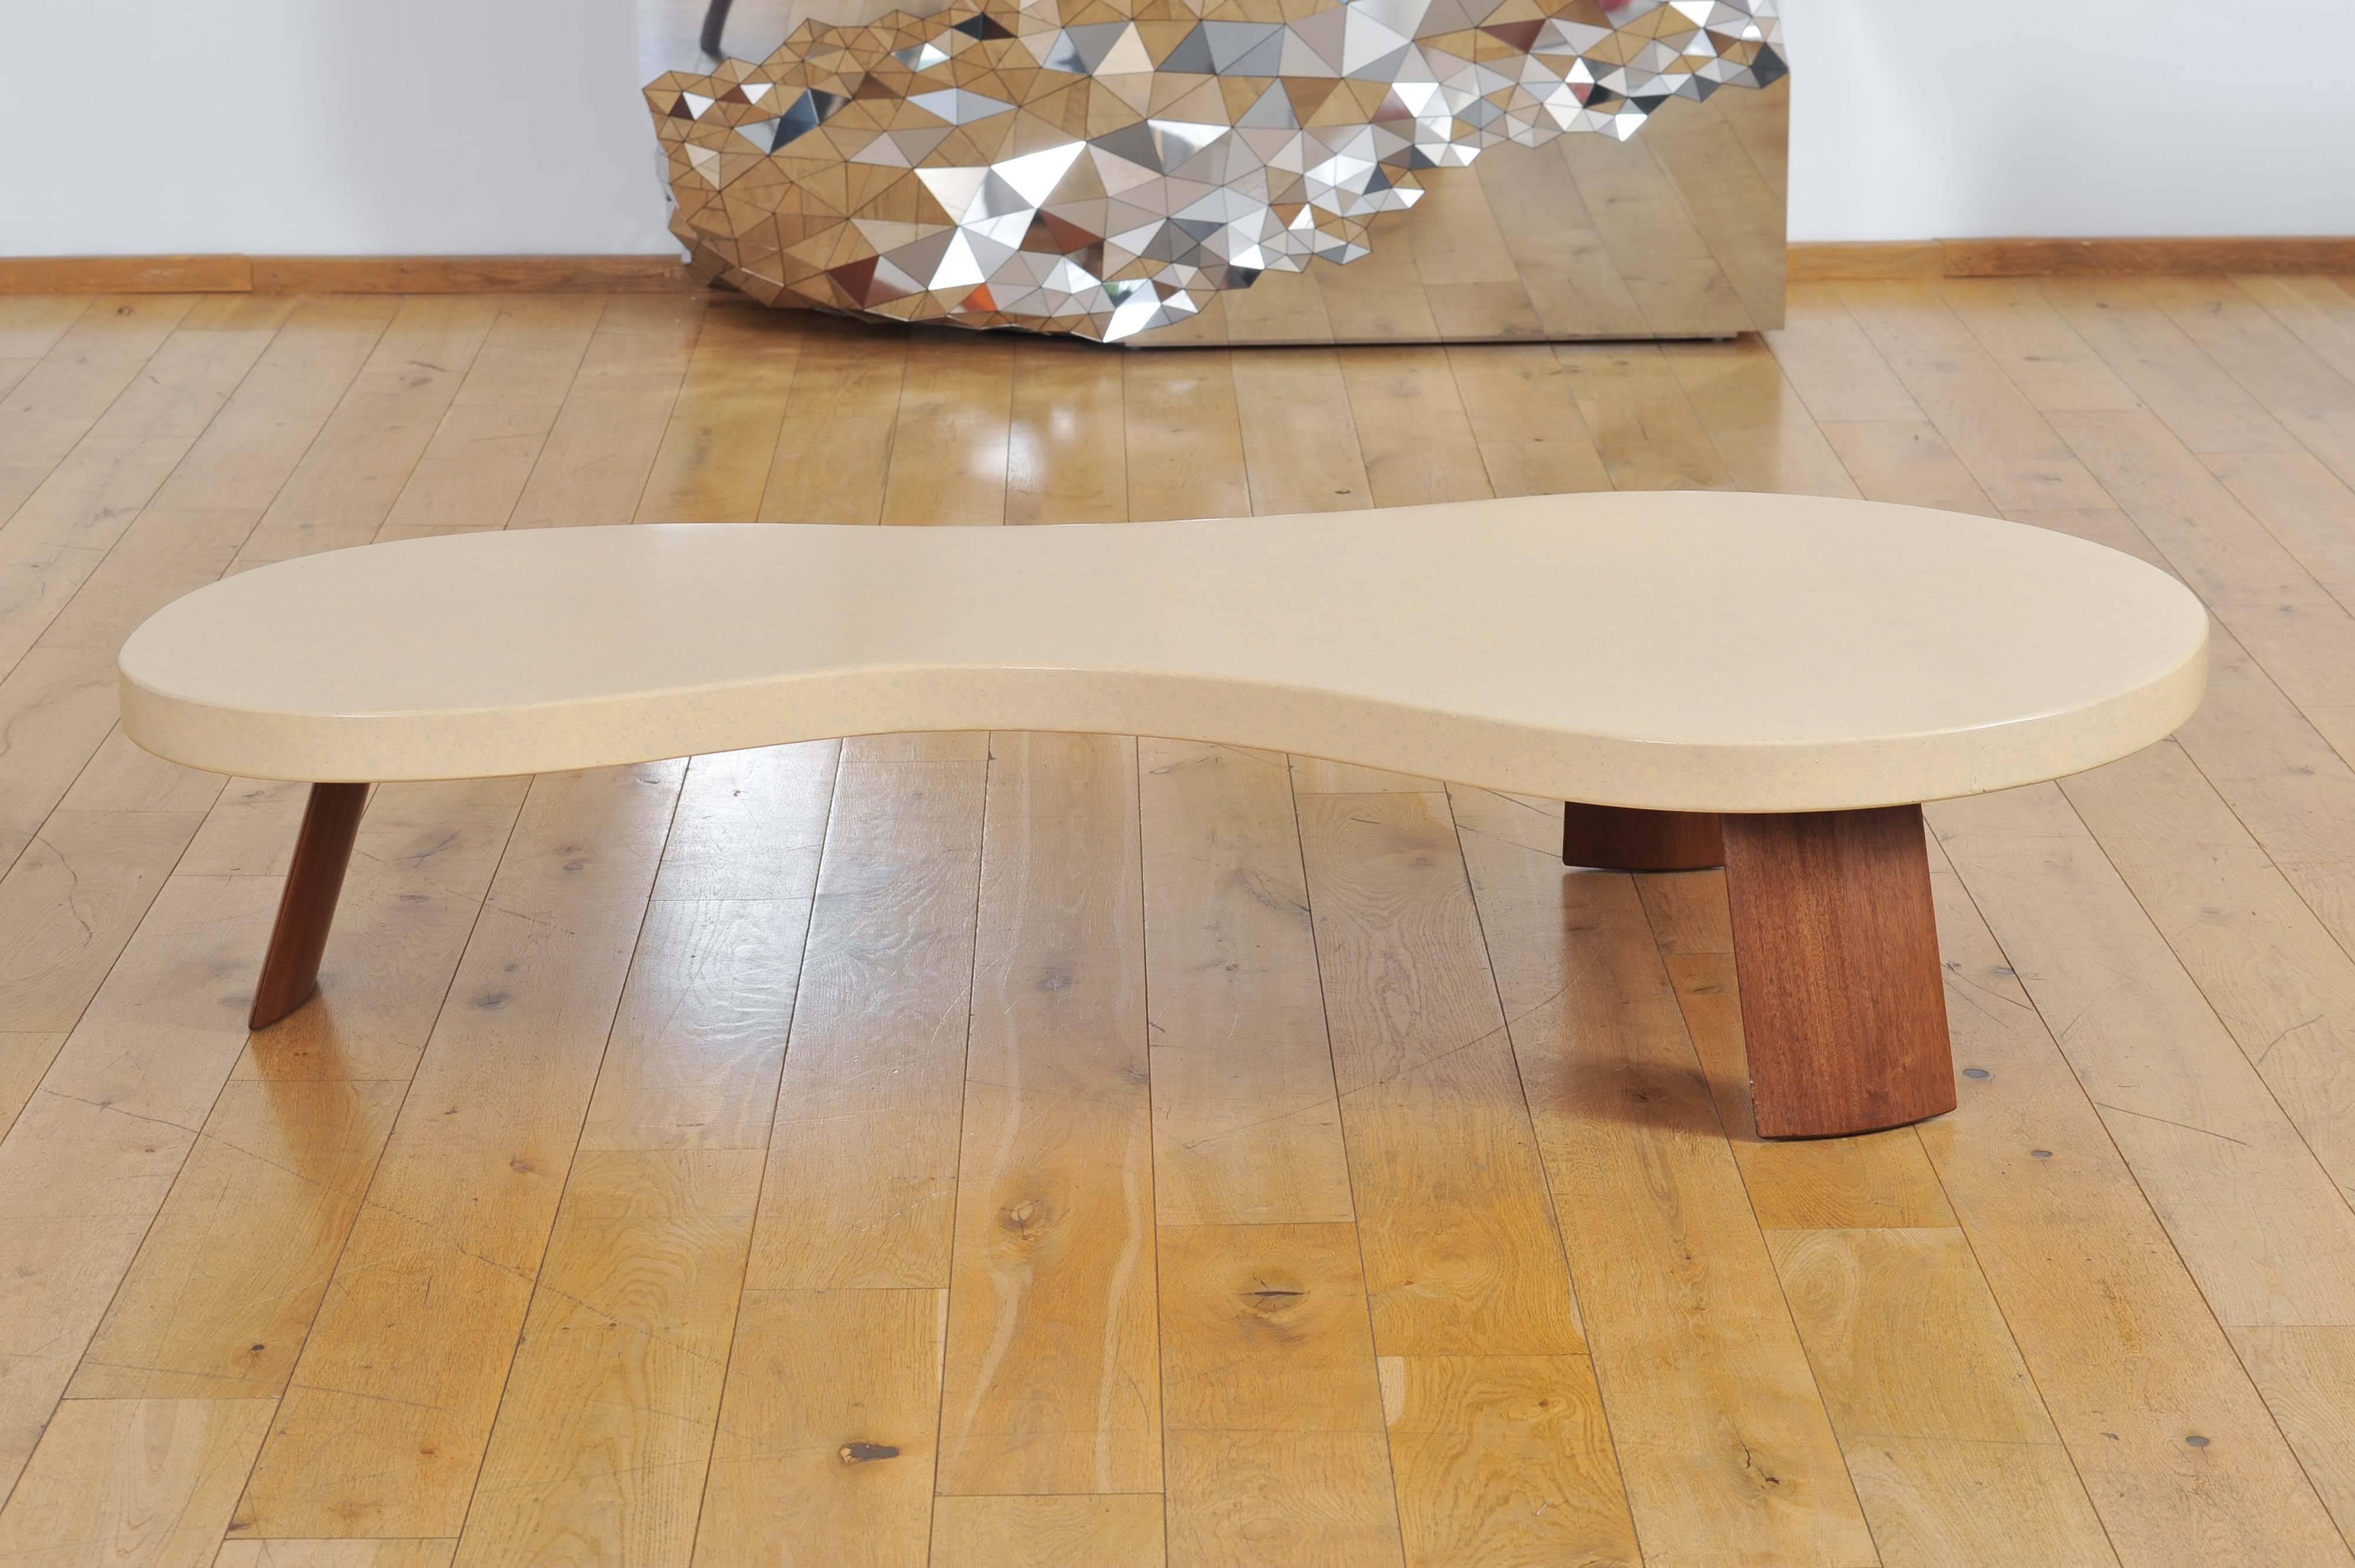 Coffee table by Paul Frankl, USA, circa 1948
for the Johnson Furniture Company
lacquered cork on mahogany legs
branded number on underside: 5005 166.